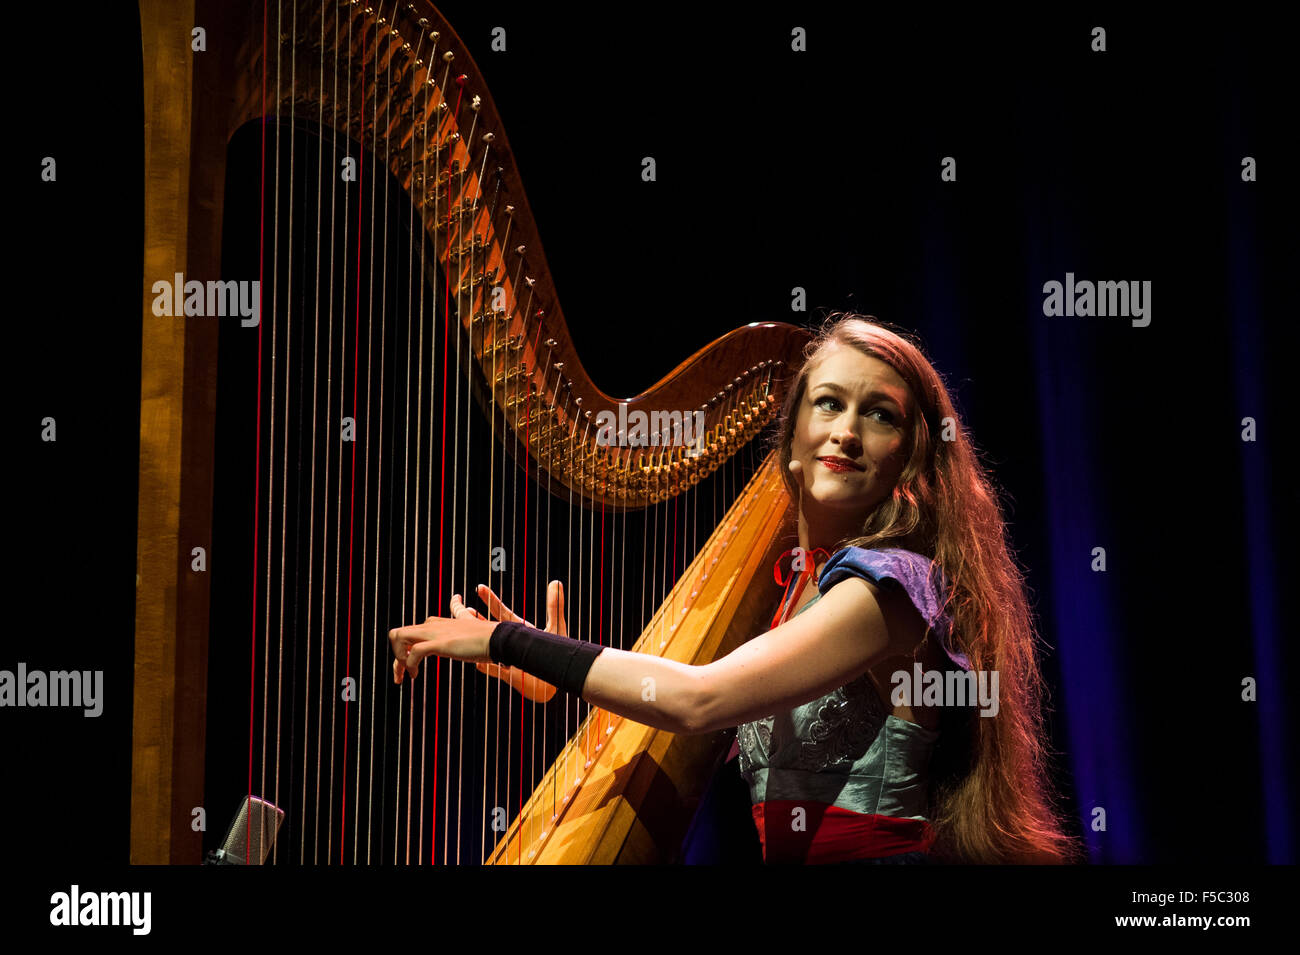 Brighton, UK. 1st November 2015. Joanna Newsom, American singer-songwriter and harpist, performs live at the Brighton Dome in Brighton, England, on her second UK tour date. The tour follows the release of her fourth album - and first in five years - 'Divers', released on 23 October via Drag City. Credit:  Francesca Moore/Alamy Live News Stock Photo